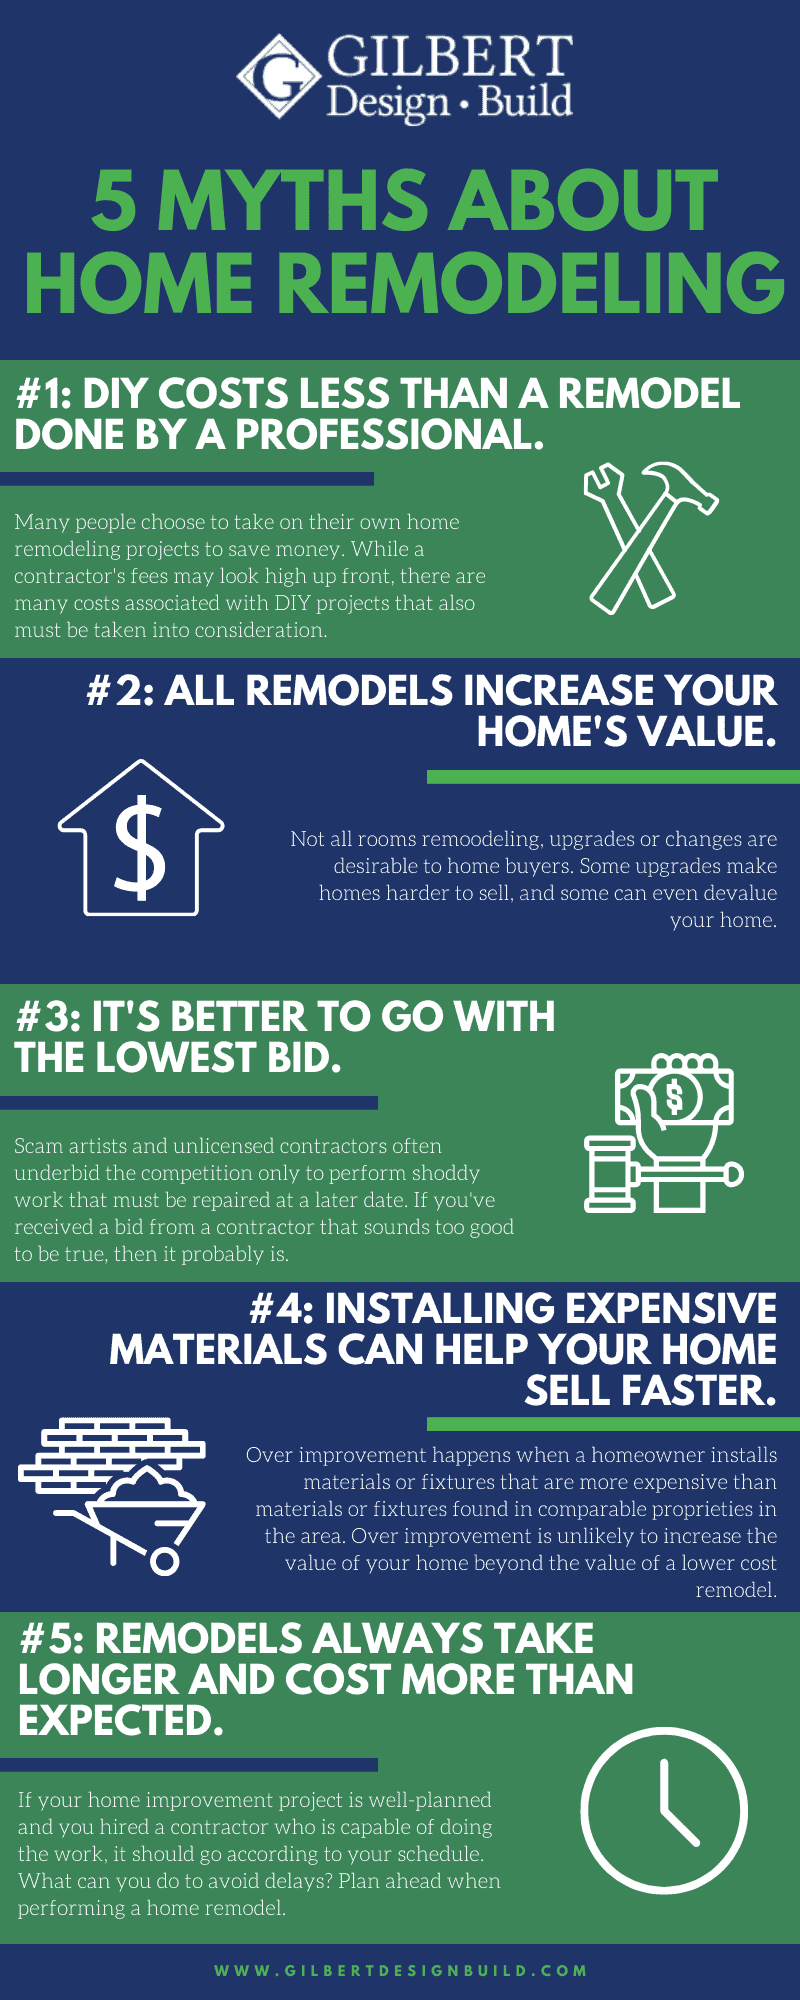 5 Myths About Home Remodeling in 2022